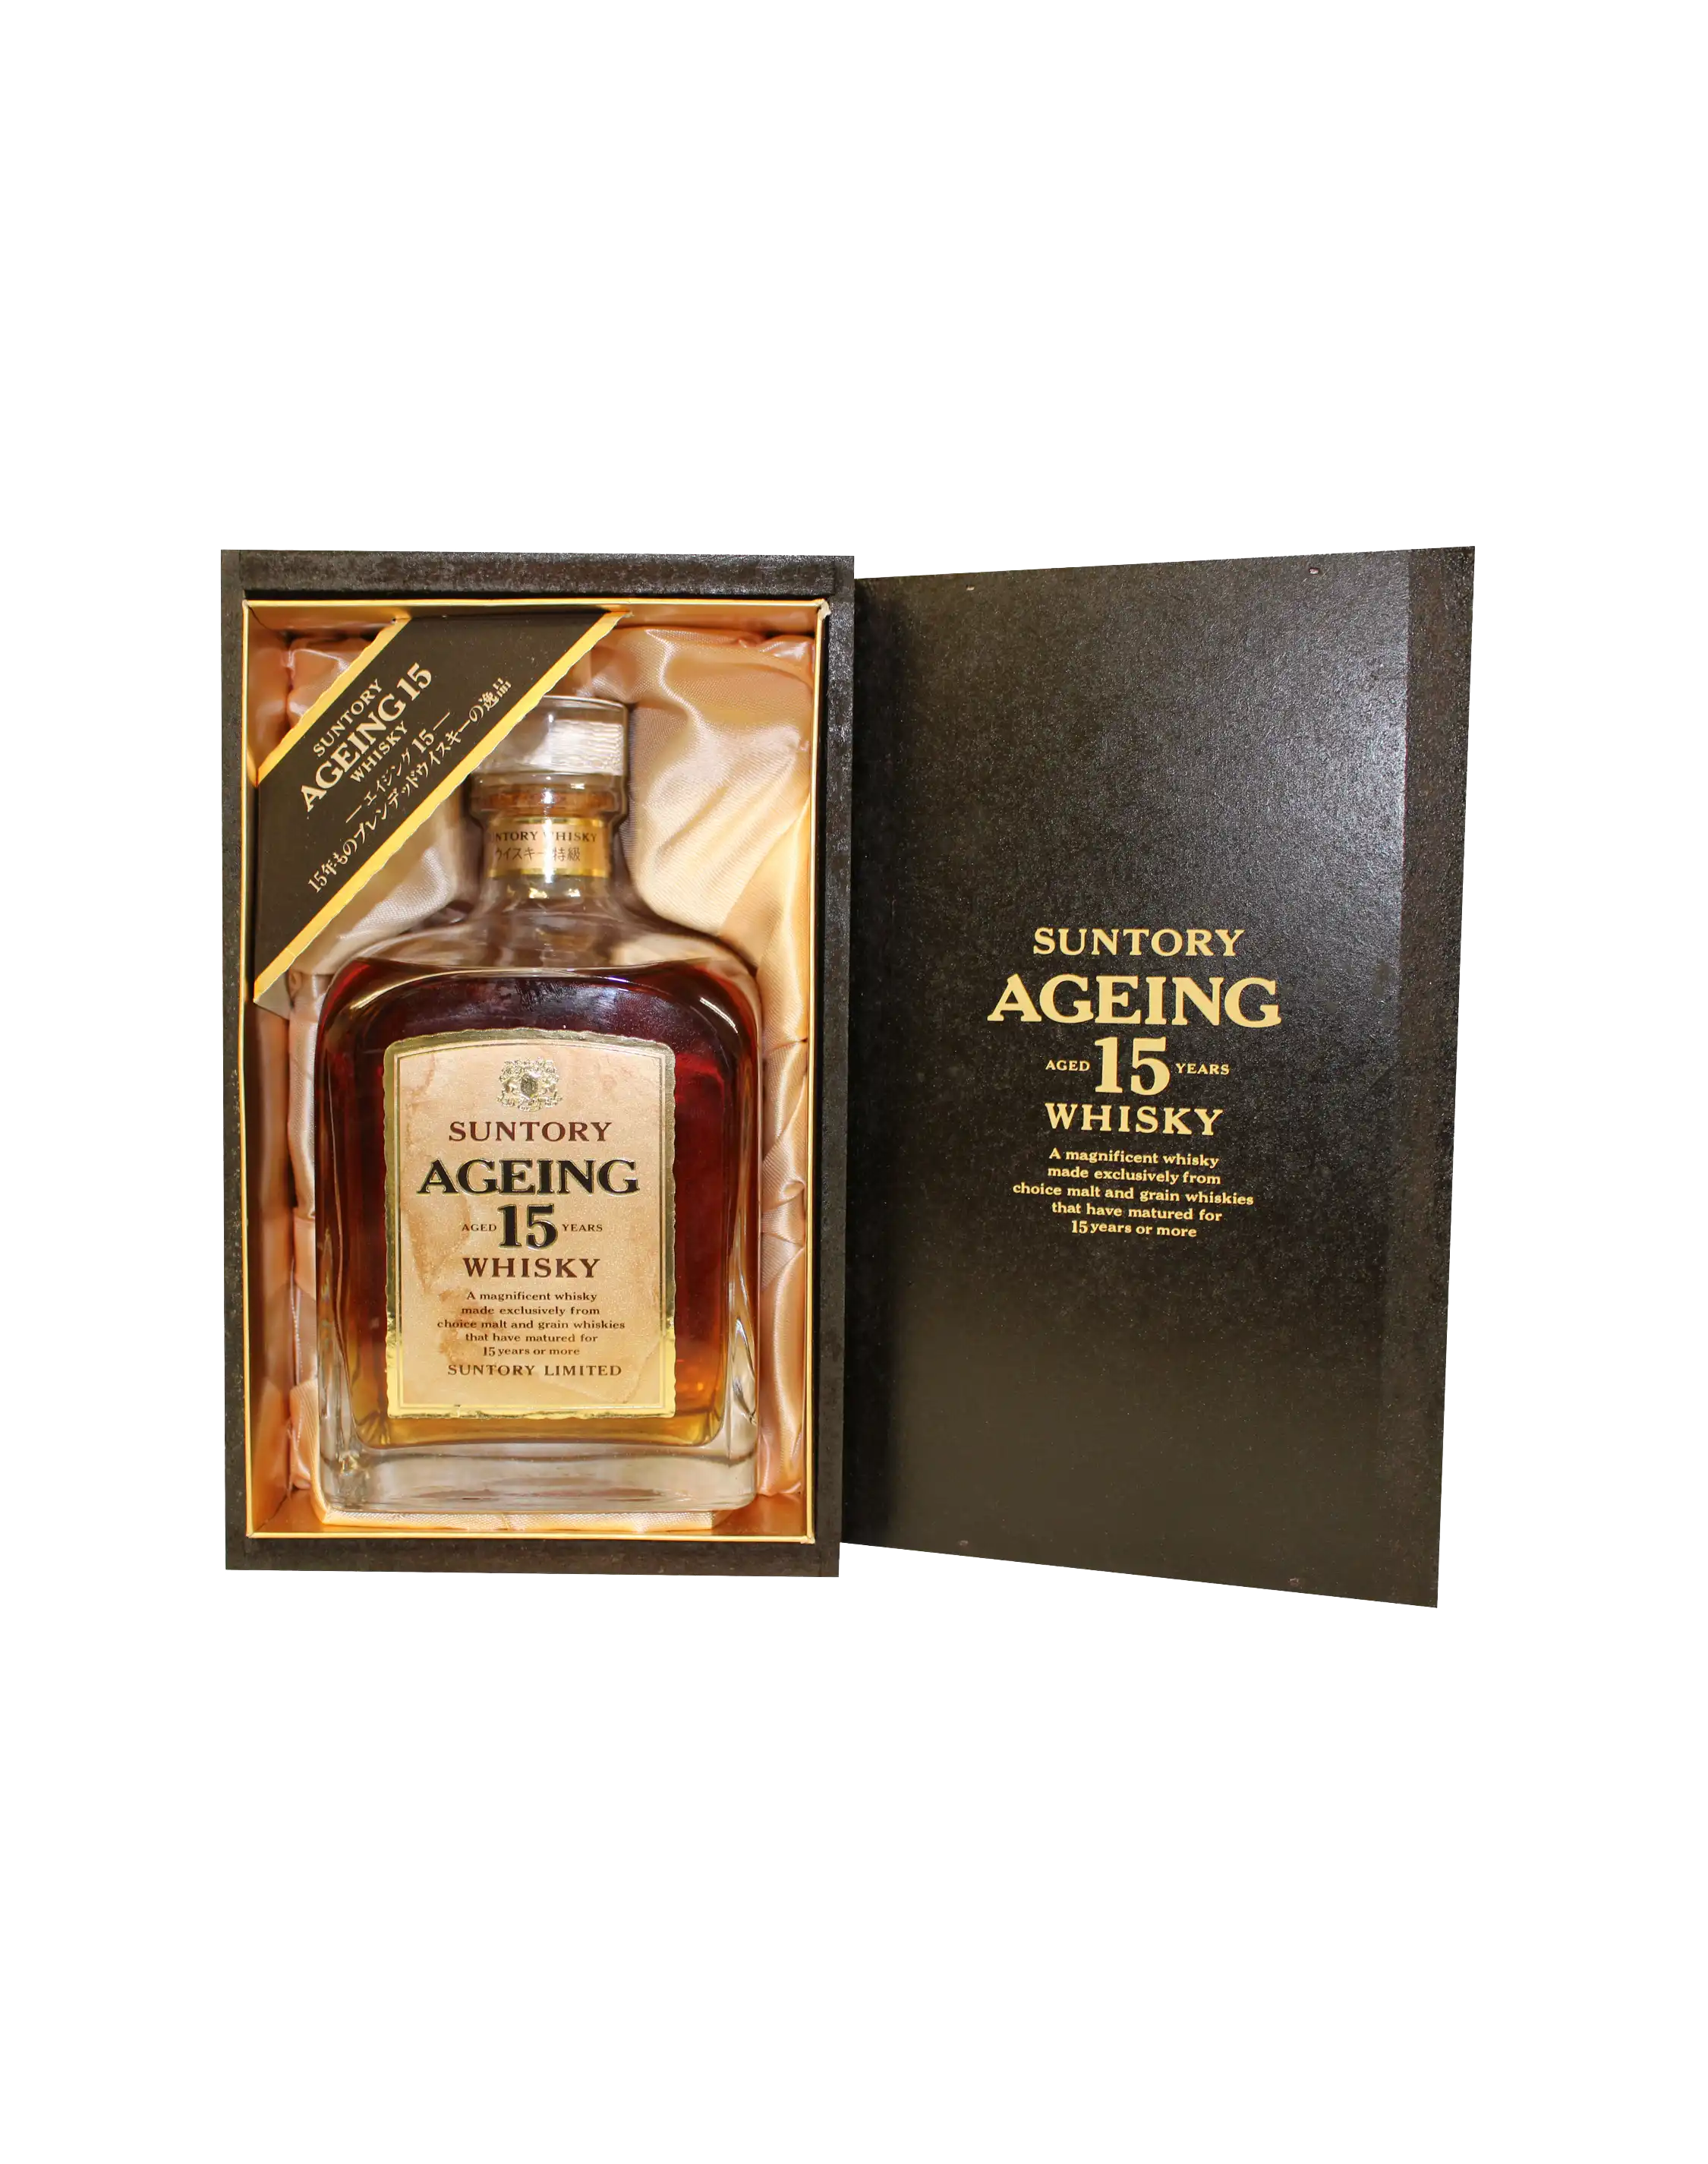 Suntory Ageing 15 Year Old Whisky